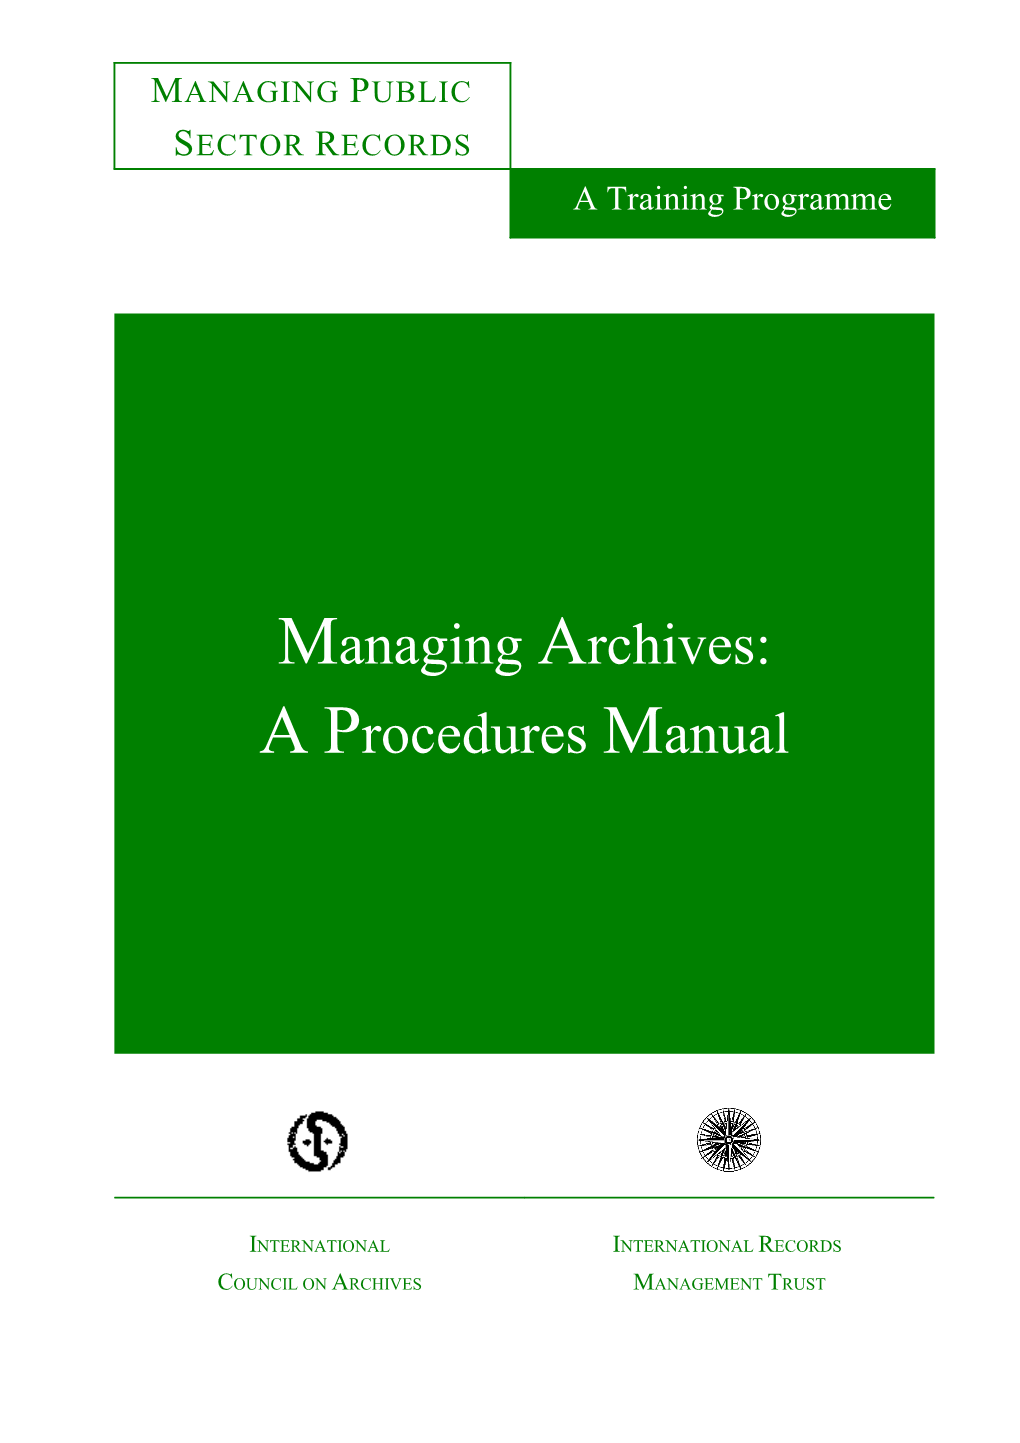 Managing Archives: a Procedures Manual